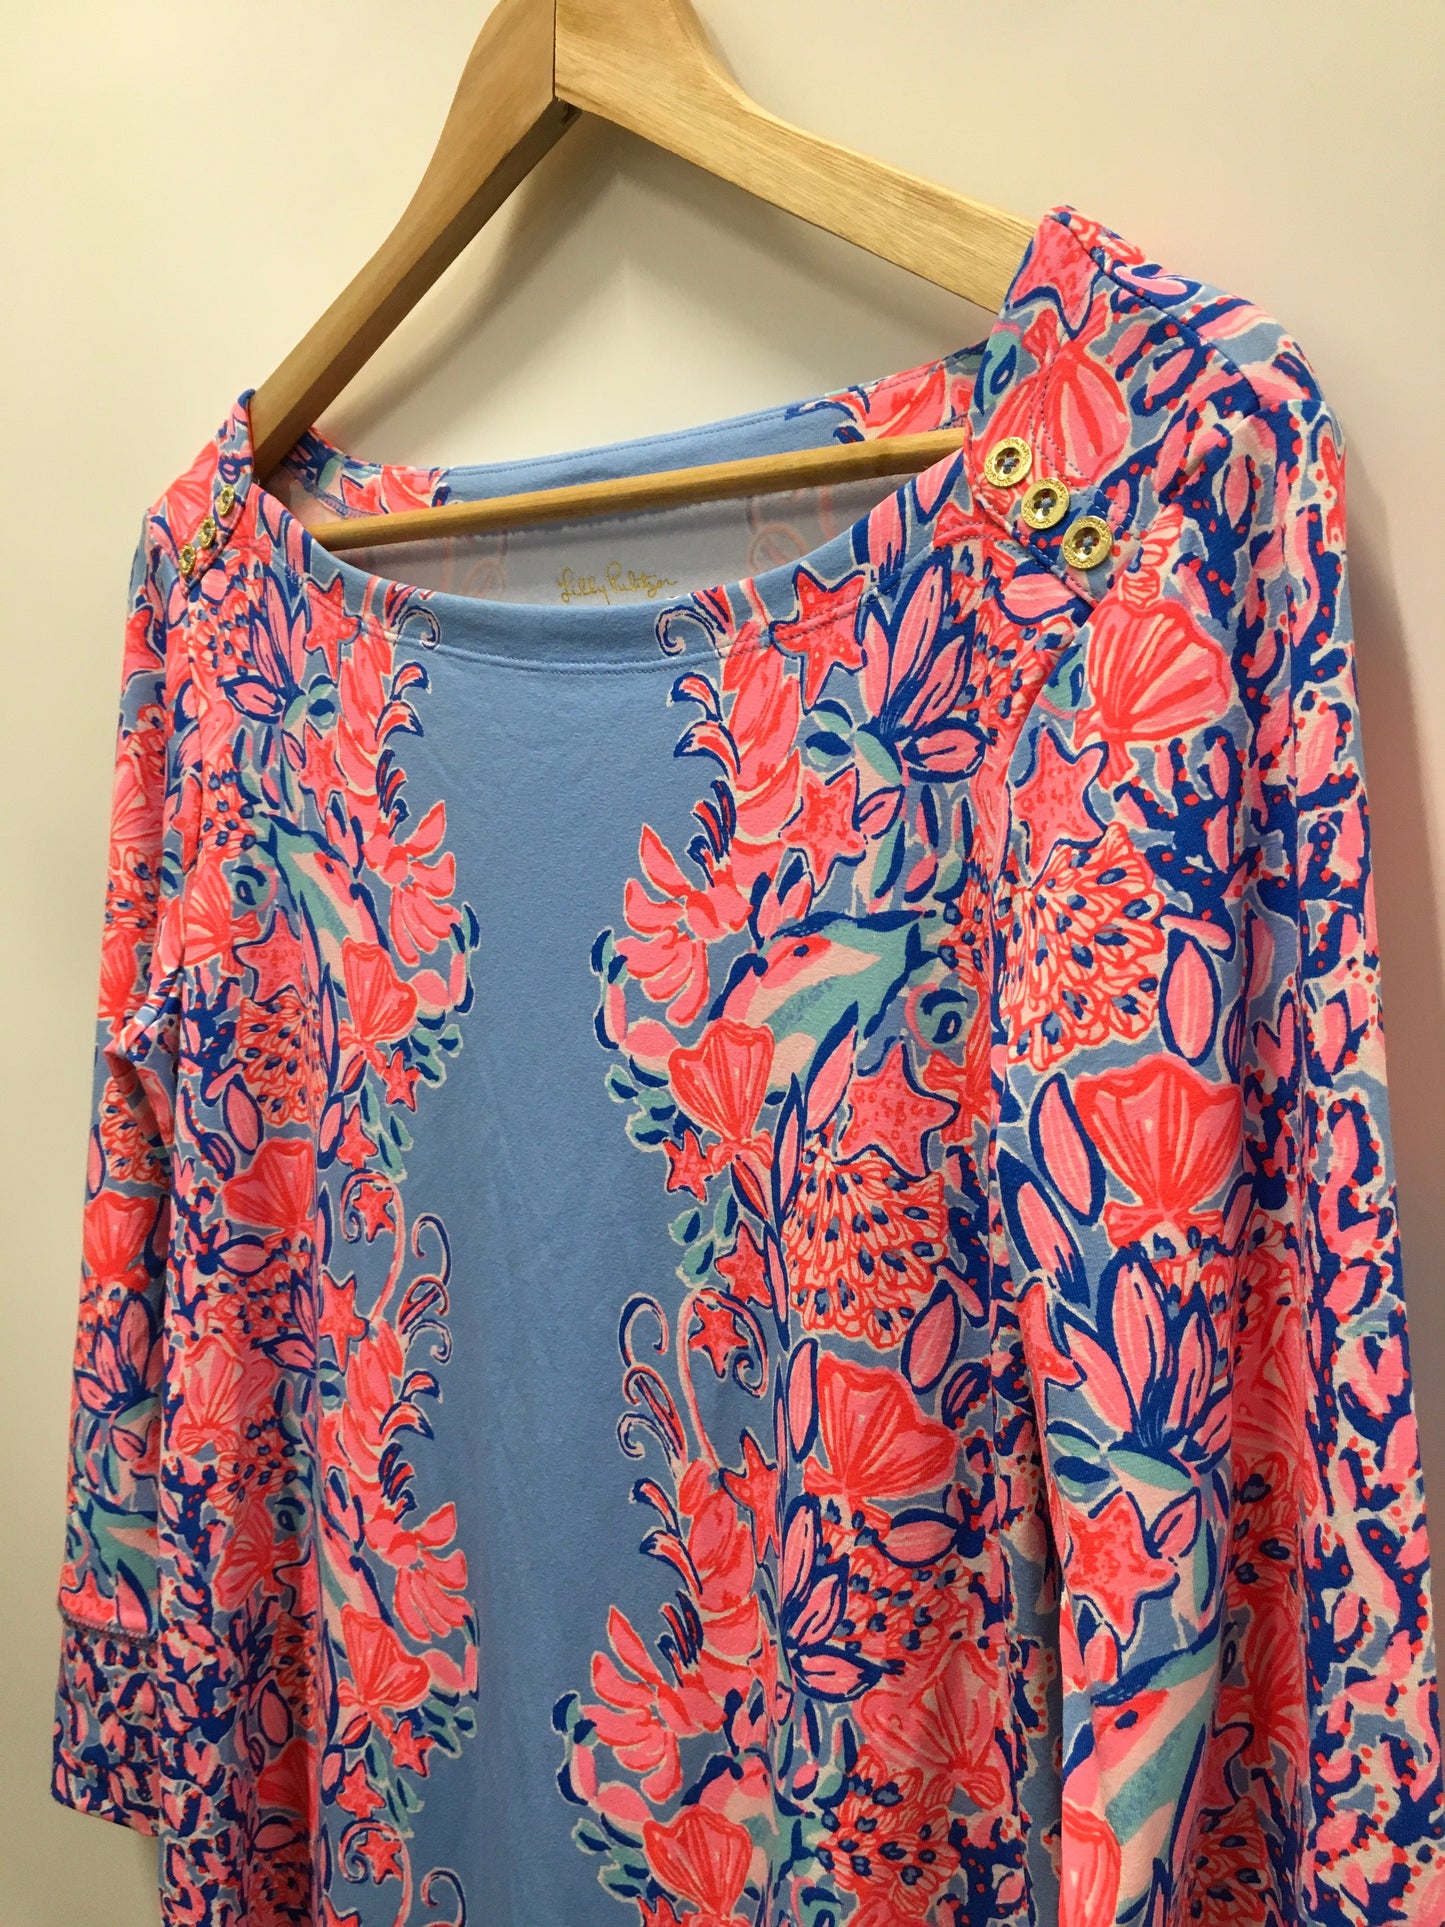 Blue & Pink Dress Casual Midi Lilly Pulitzer, Size M